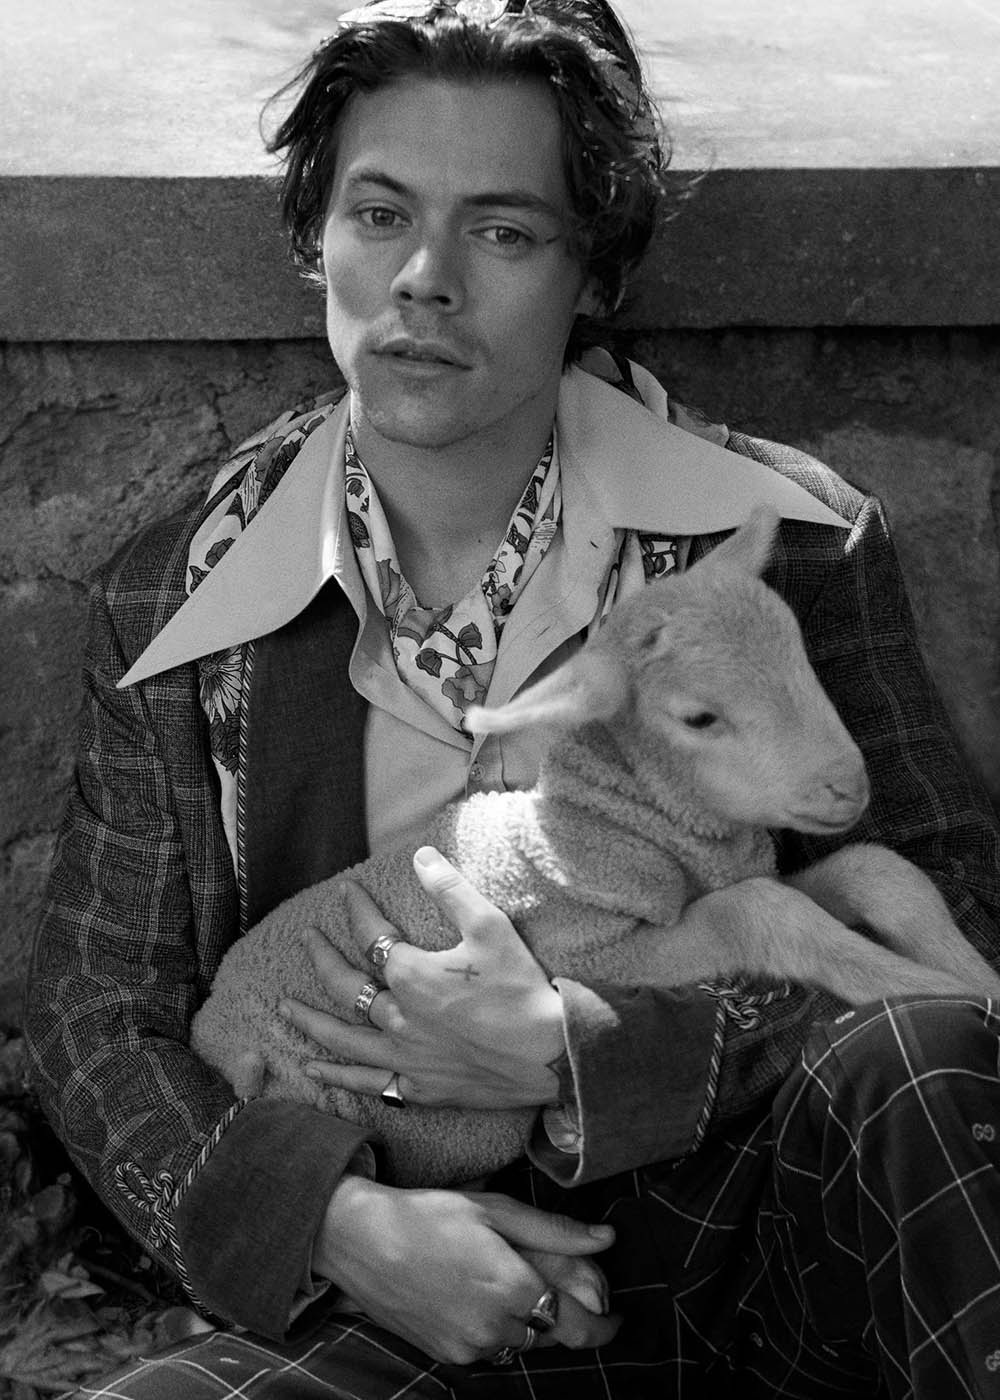 Gucci Cruise 2019 Men’s Tailoring Campaign with Harry Styles